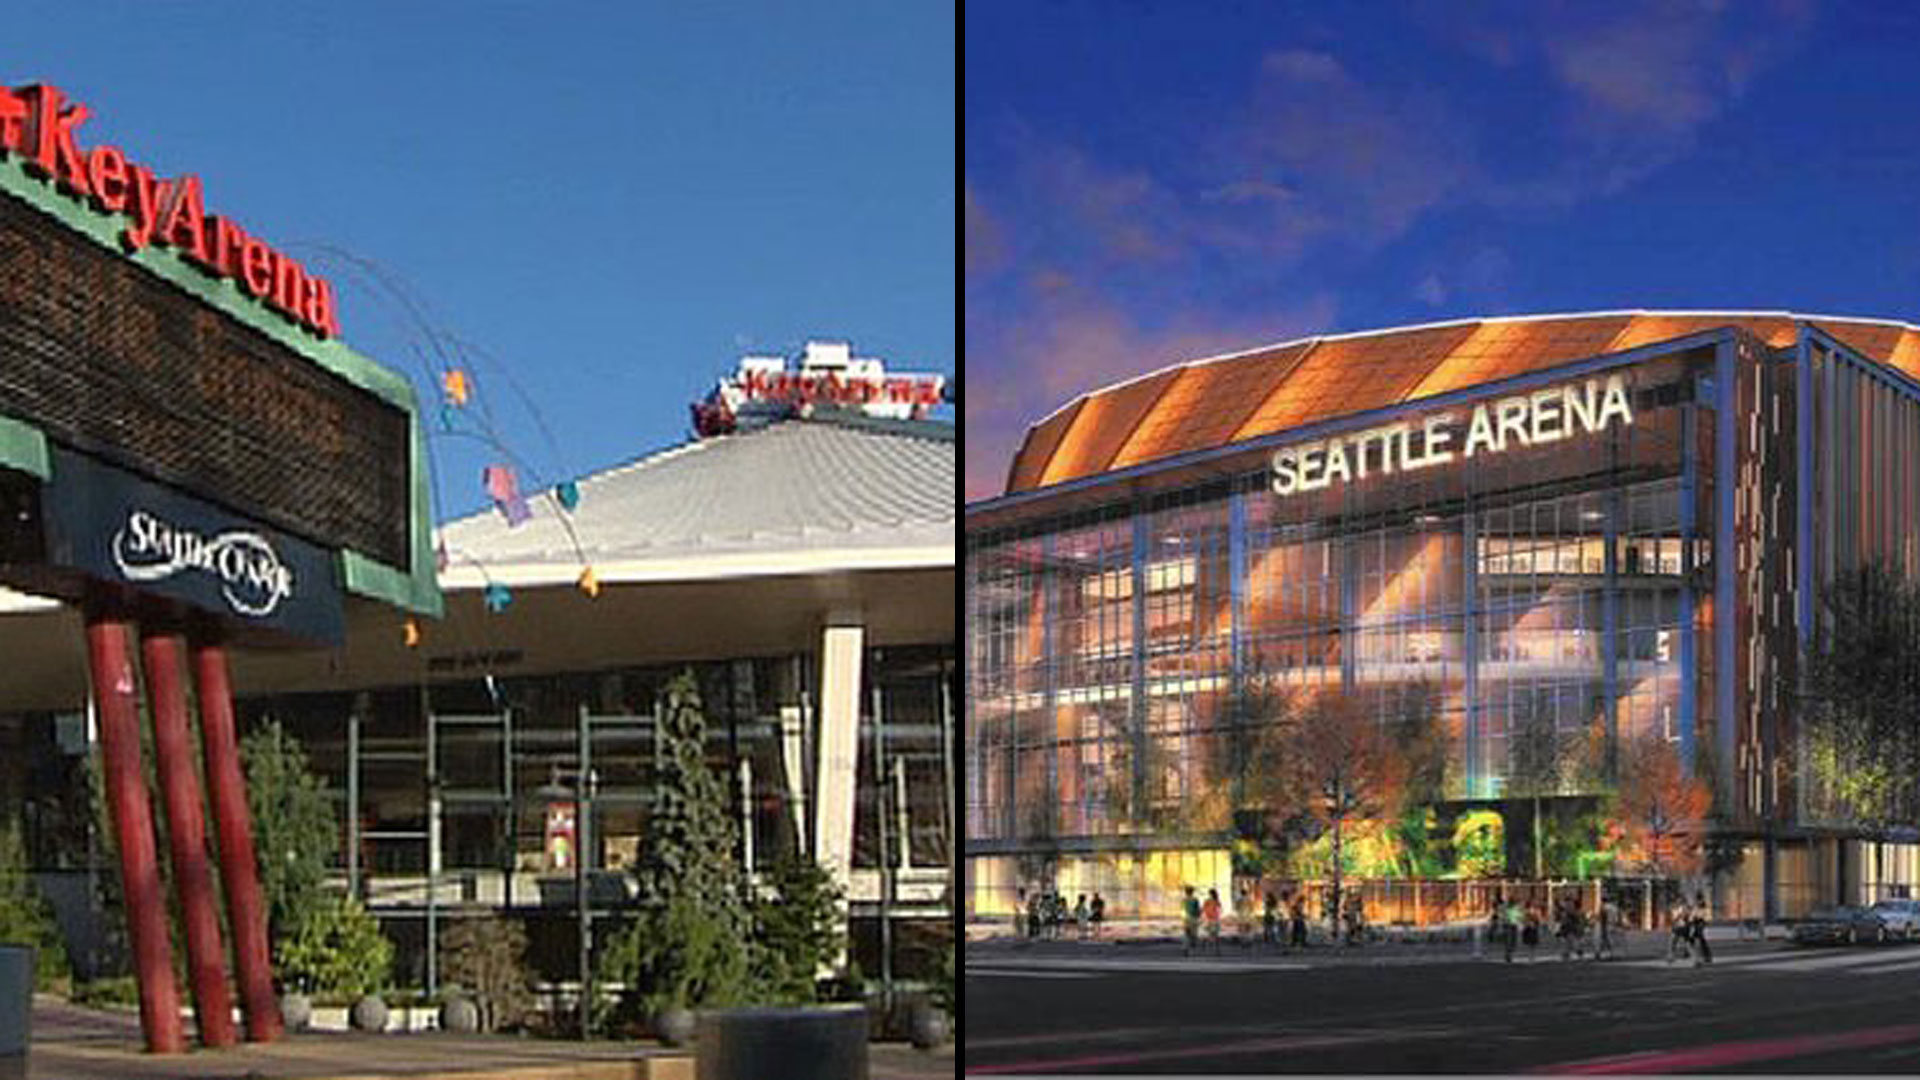 Seattle new NBA and NHL arena approved by city councilDilemma X